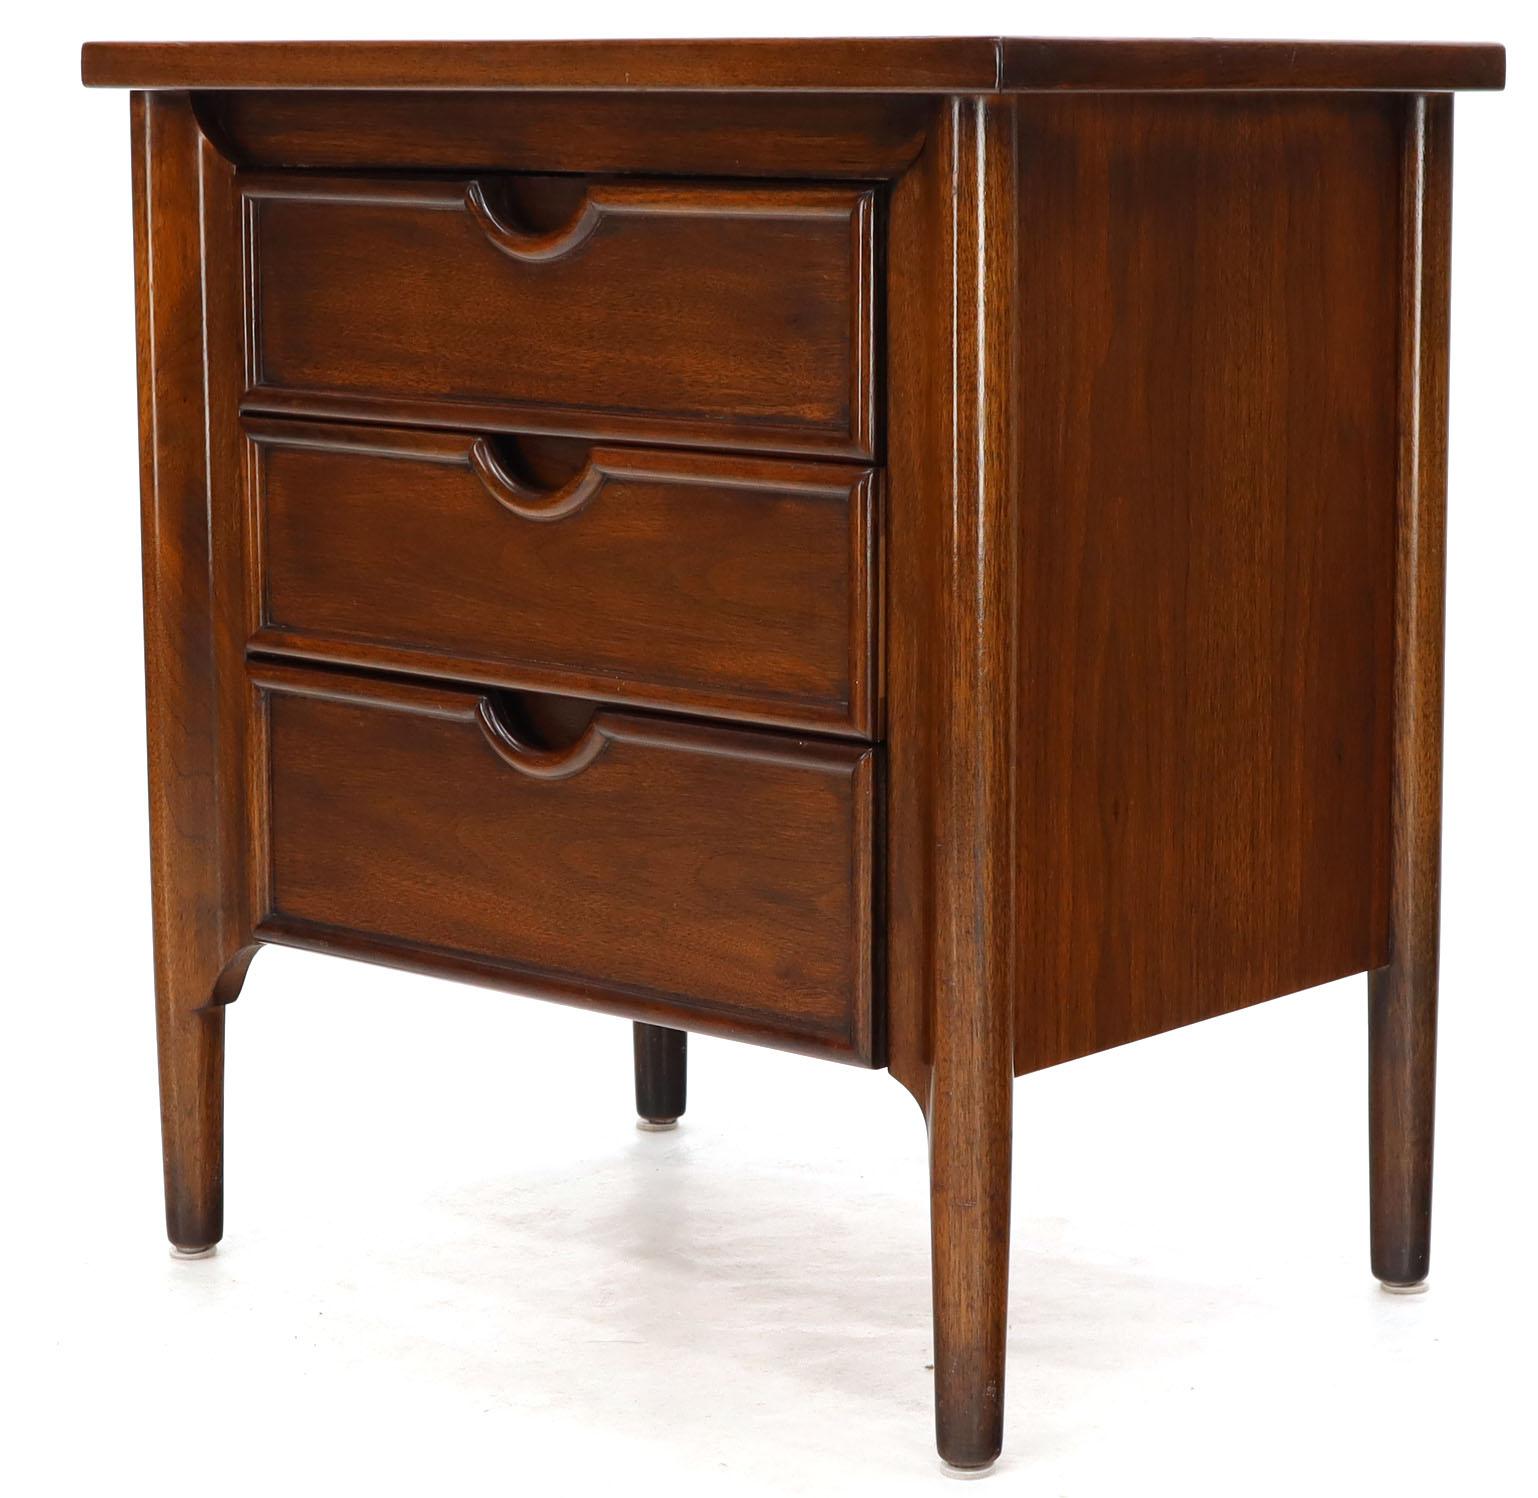 Walnut Pair of Exposed Sculptural Legs Three Drawers Nightstands End Tables Stands For Sale